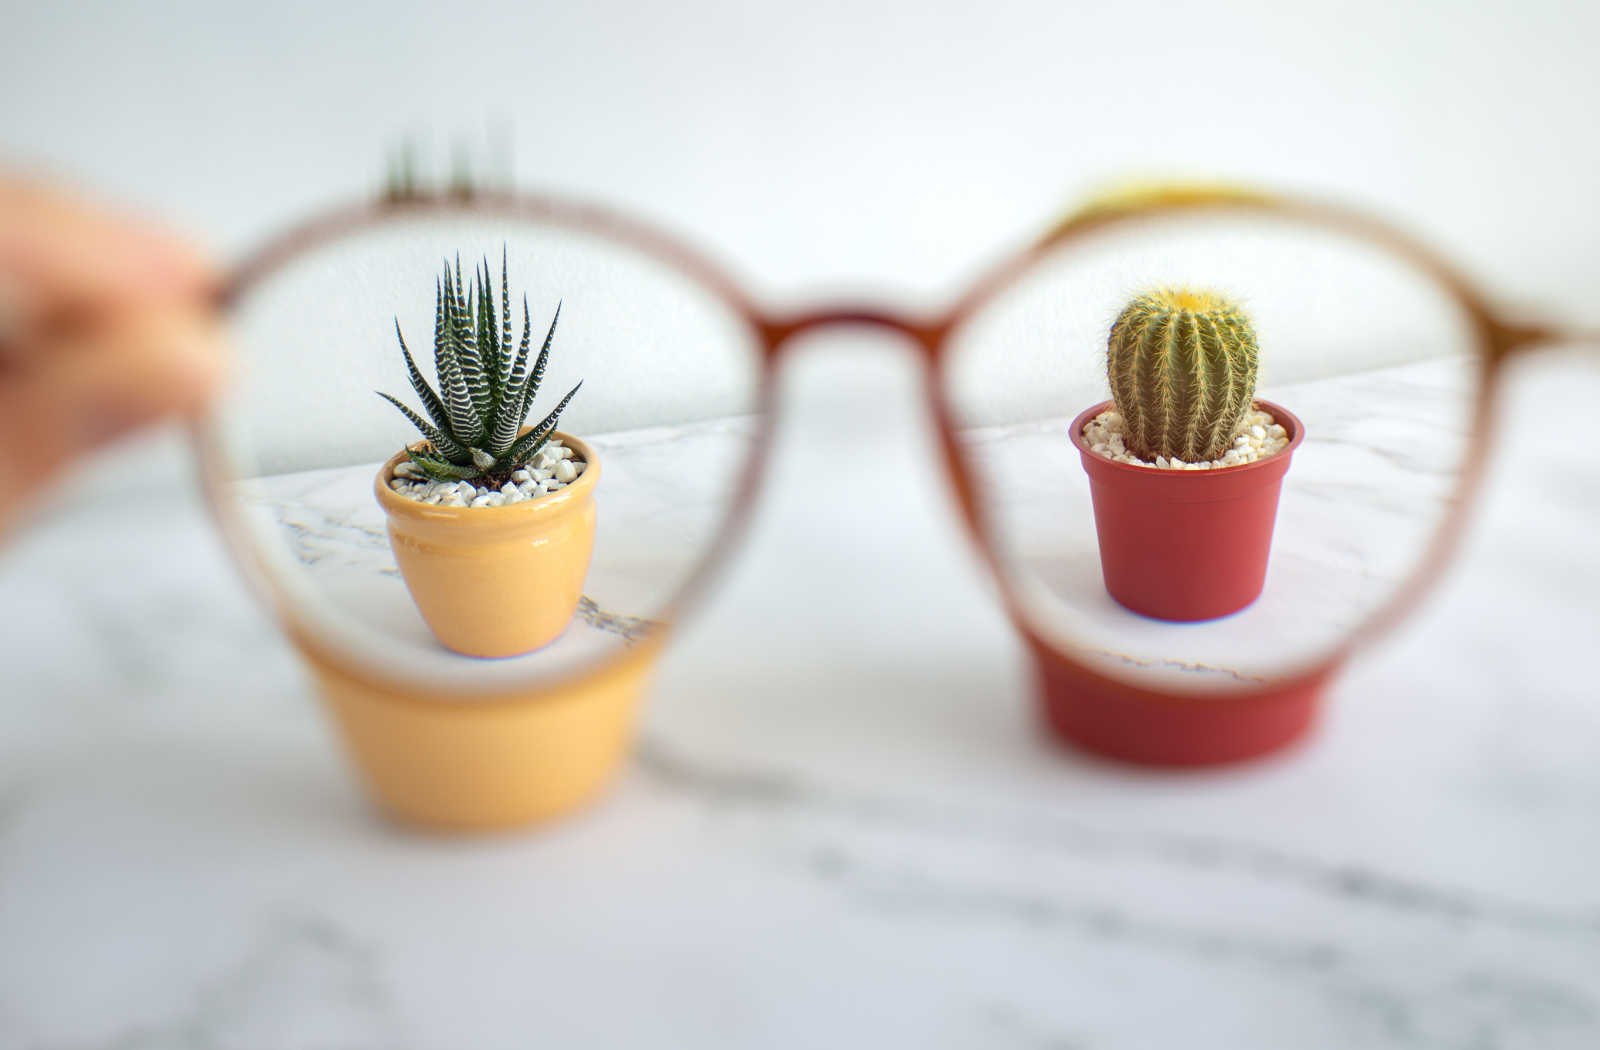 A hand holding a pair of glasses with a small cactus seen in each lens, showing the clarity of corrective lenses.